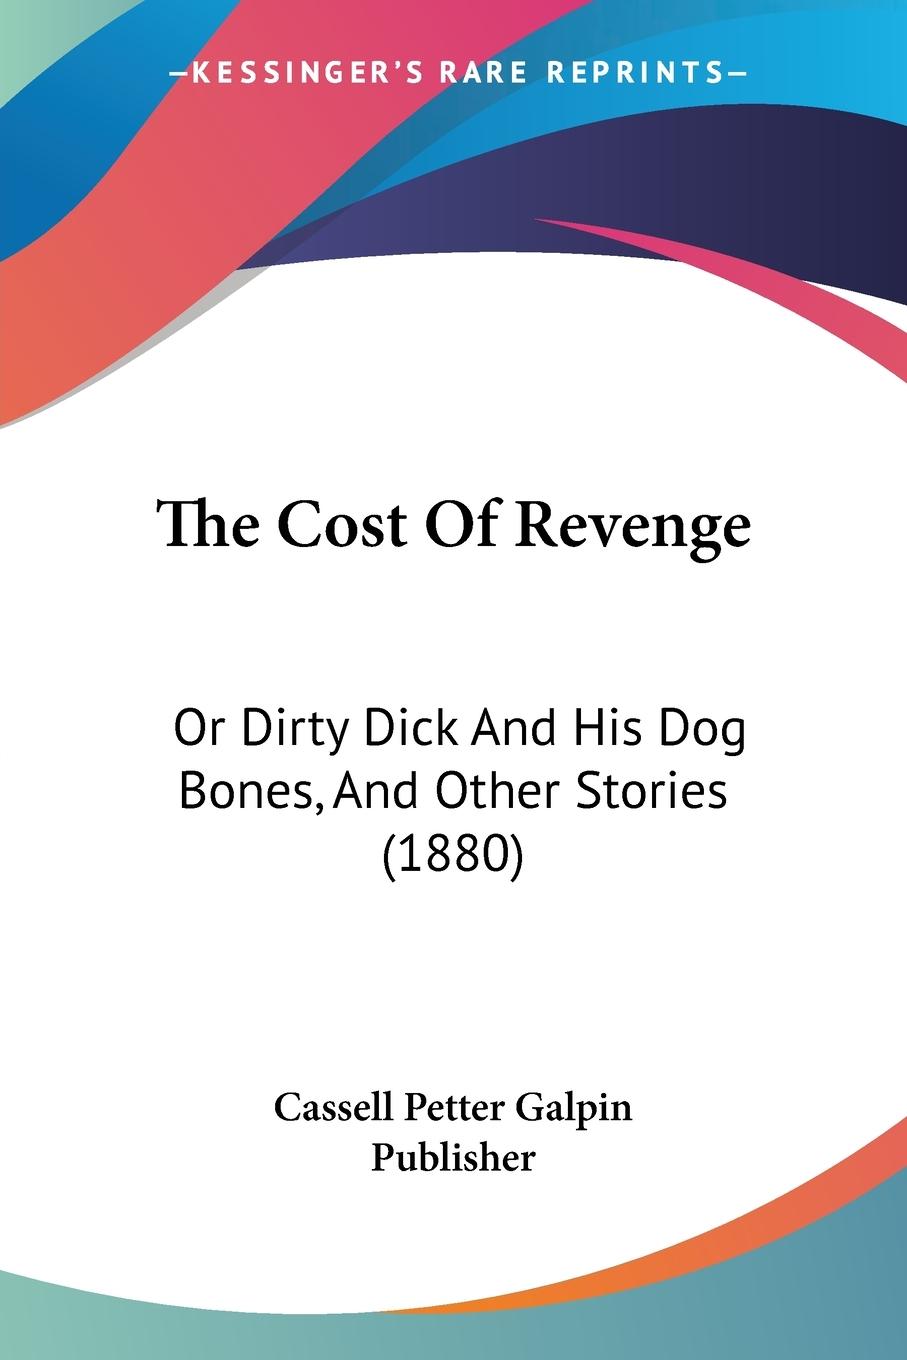 The Cost Of Revenge - Cassell Petter Galpin Publisher